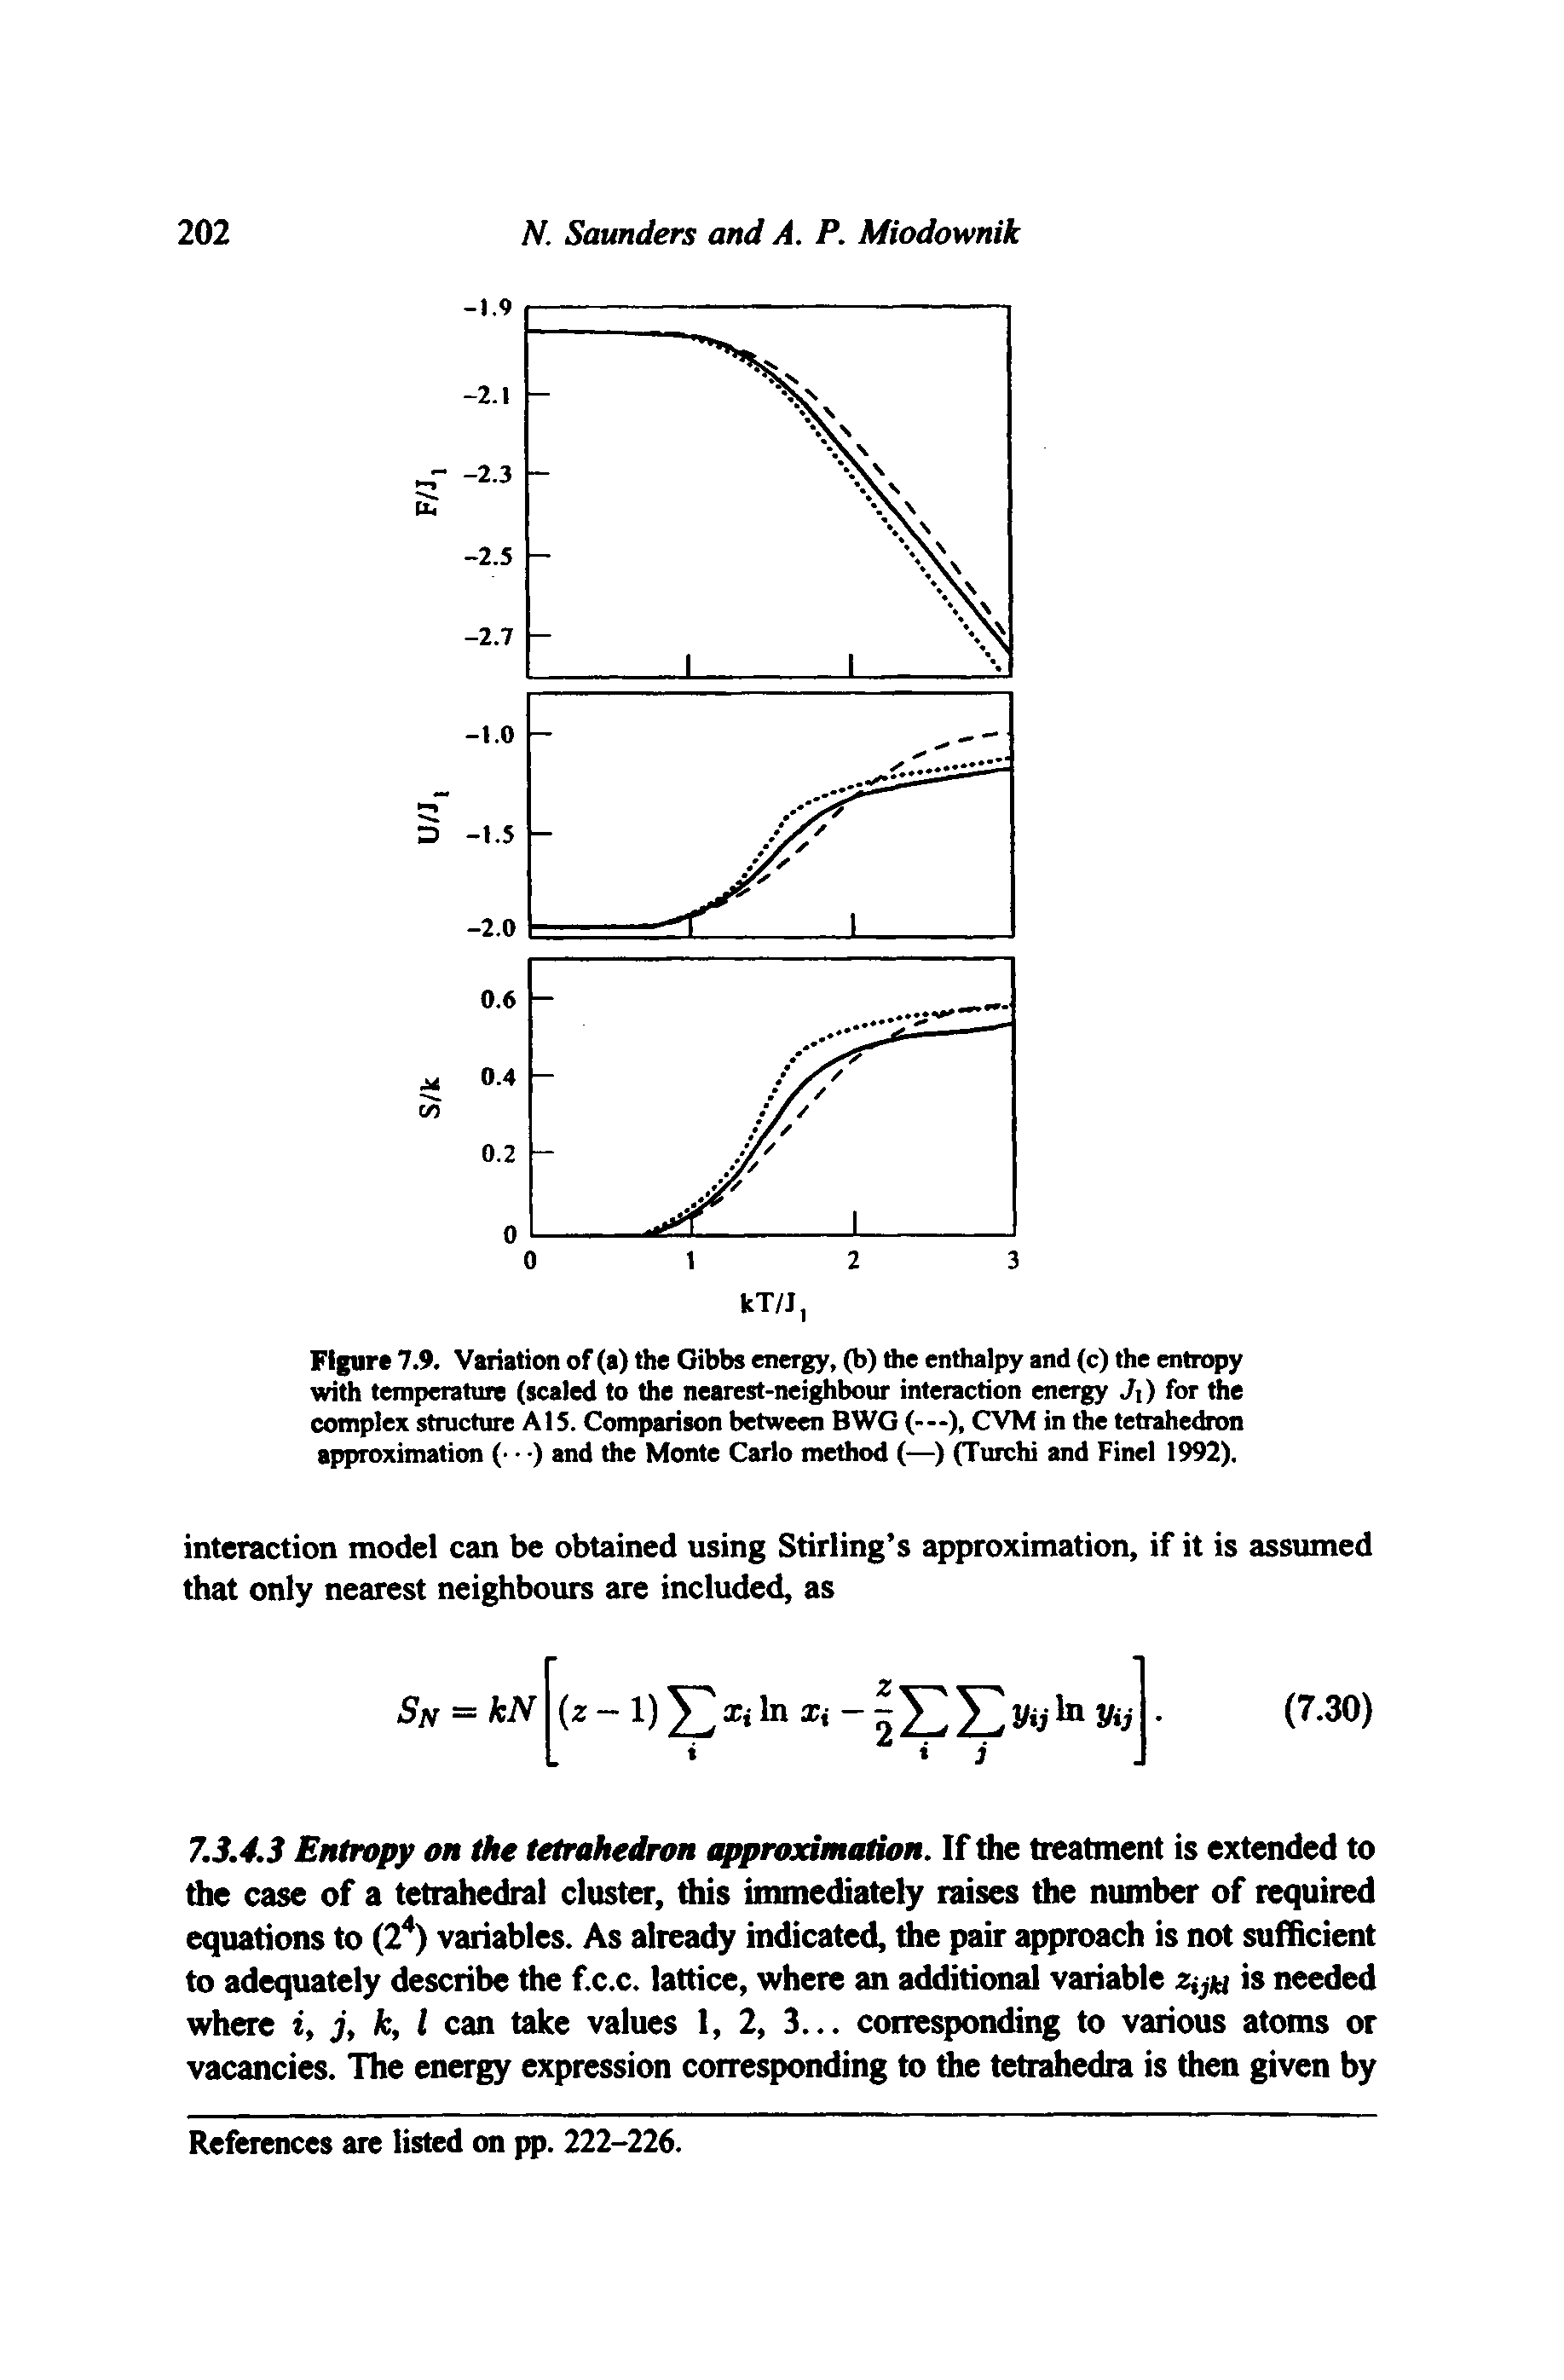 Figure 7.9. Variation of (a) the Gibbs energy, (b) ttie enthalpy and (c) the entropy with temperature (scaled to the nearest-nei bour interaction energy J ) for the complex structure A15. Comparison between BWG CVM in the tetrahedron approximation ( ) and the Monte Carlo method (—) (Turchi and Finel 1992).